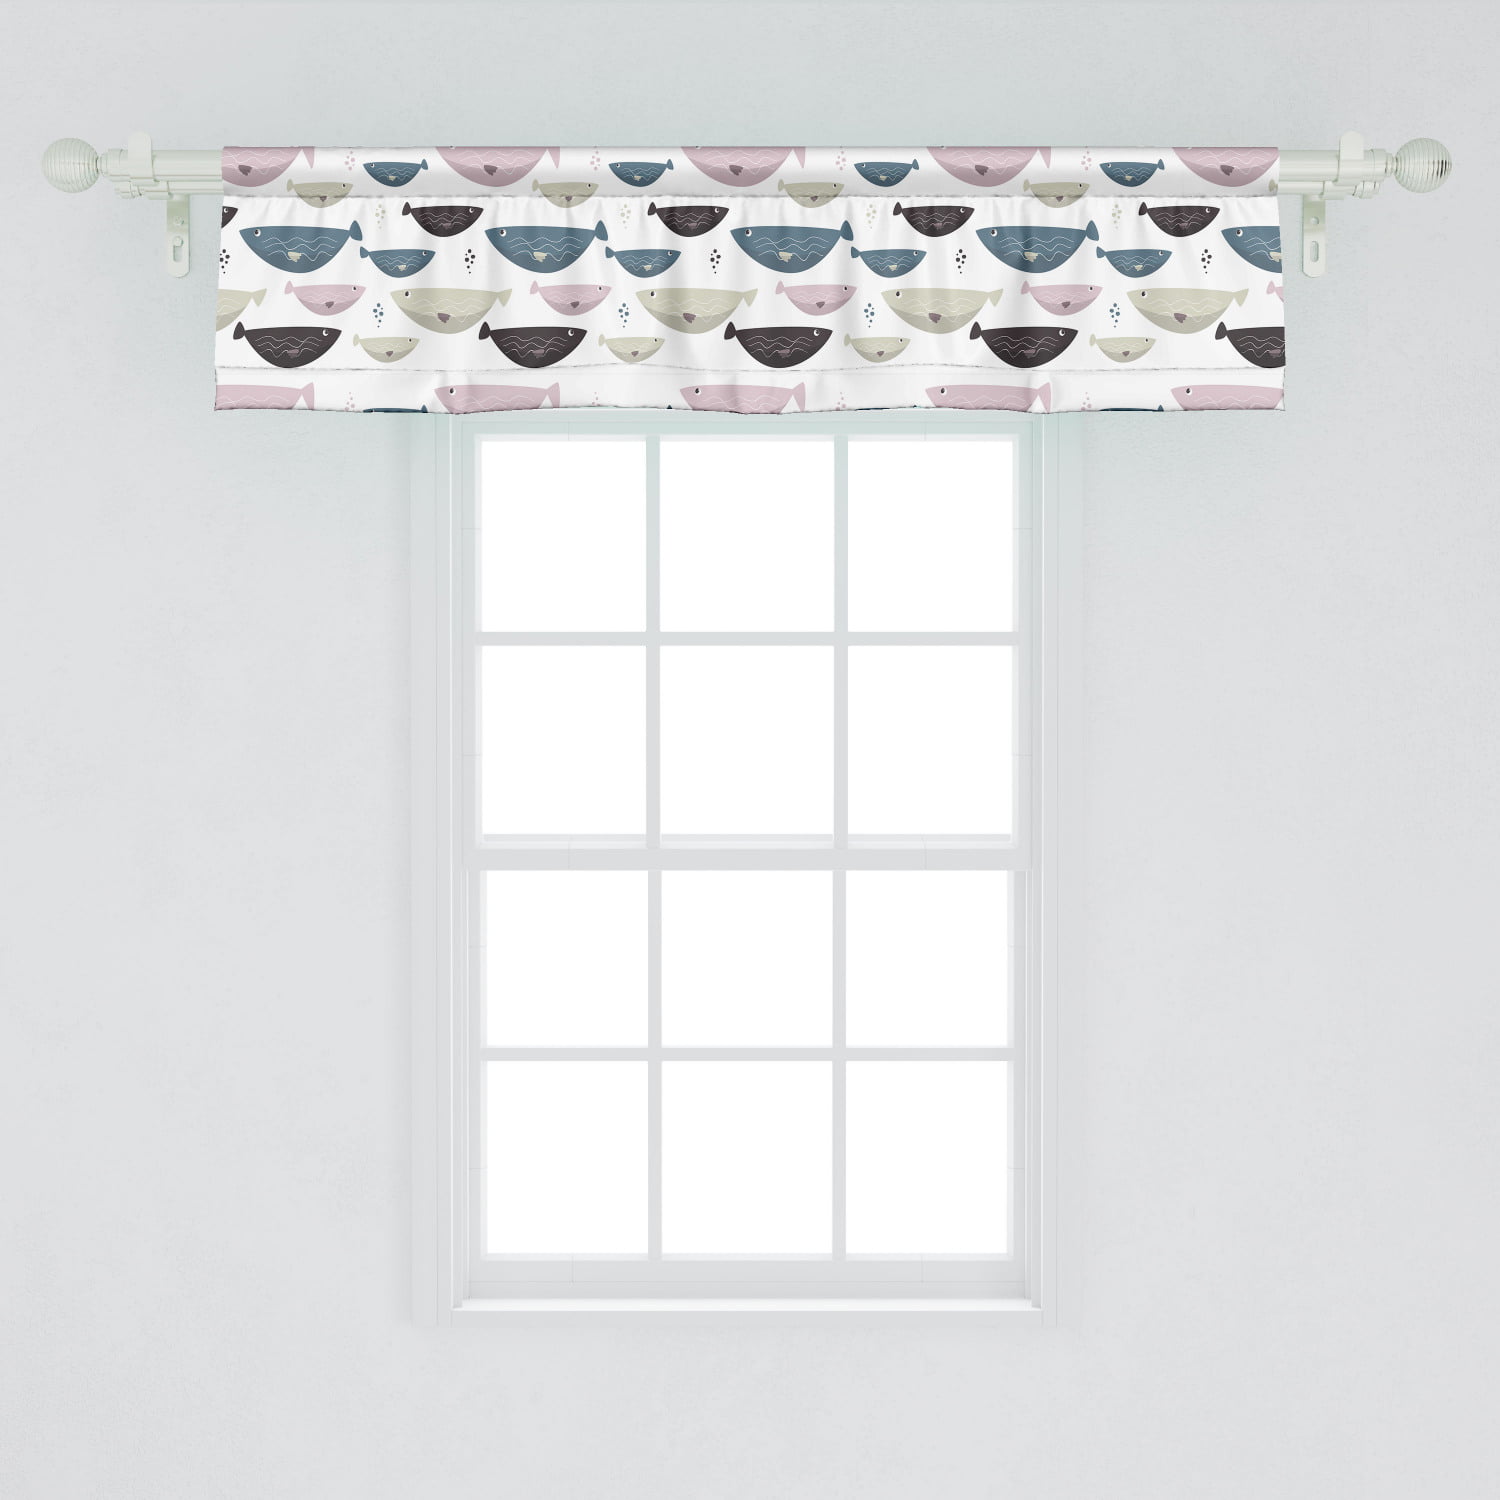 Ambesonne Underwater Window Valance, Funny Shapes of Fish with Wavy Stripes,  Curtain Valance for Kitchen Bedroom Decor with Rod Pocket, 54